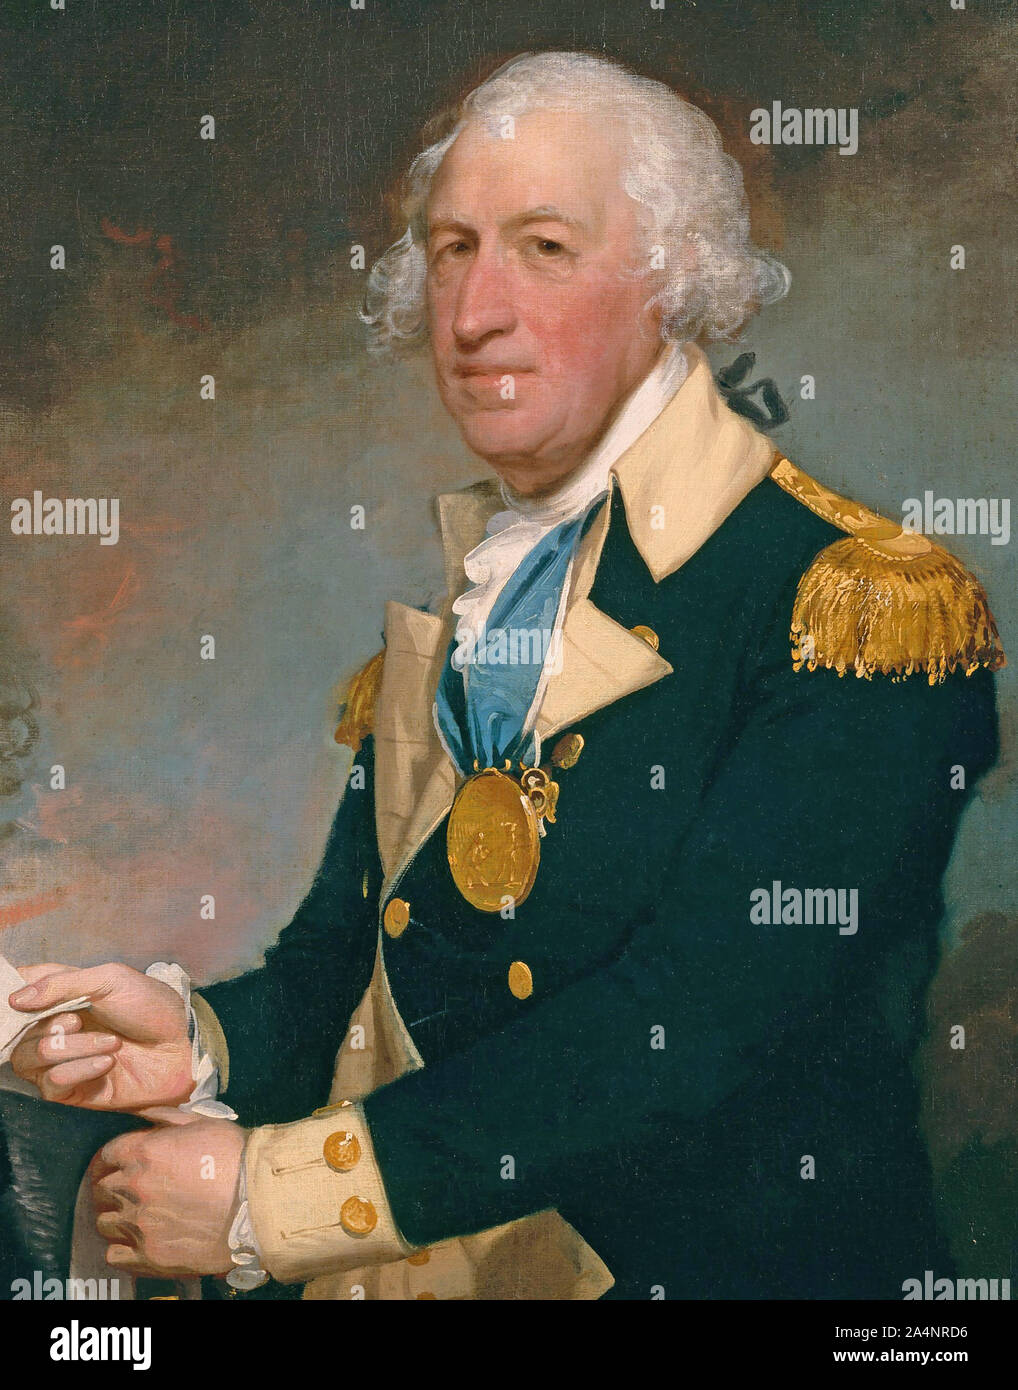 HORATIO GATES (1727-1806) British soldier who served as an American general during the Revolutionary War, painted by Gilbert Stuart Stock Photo